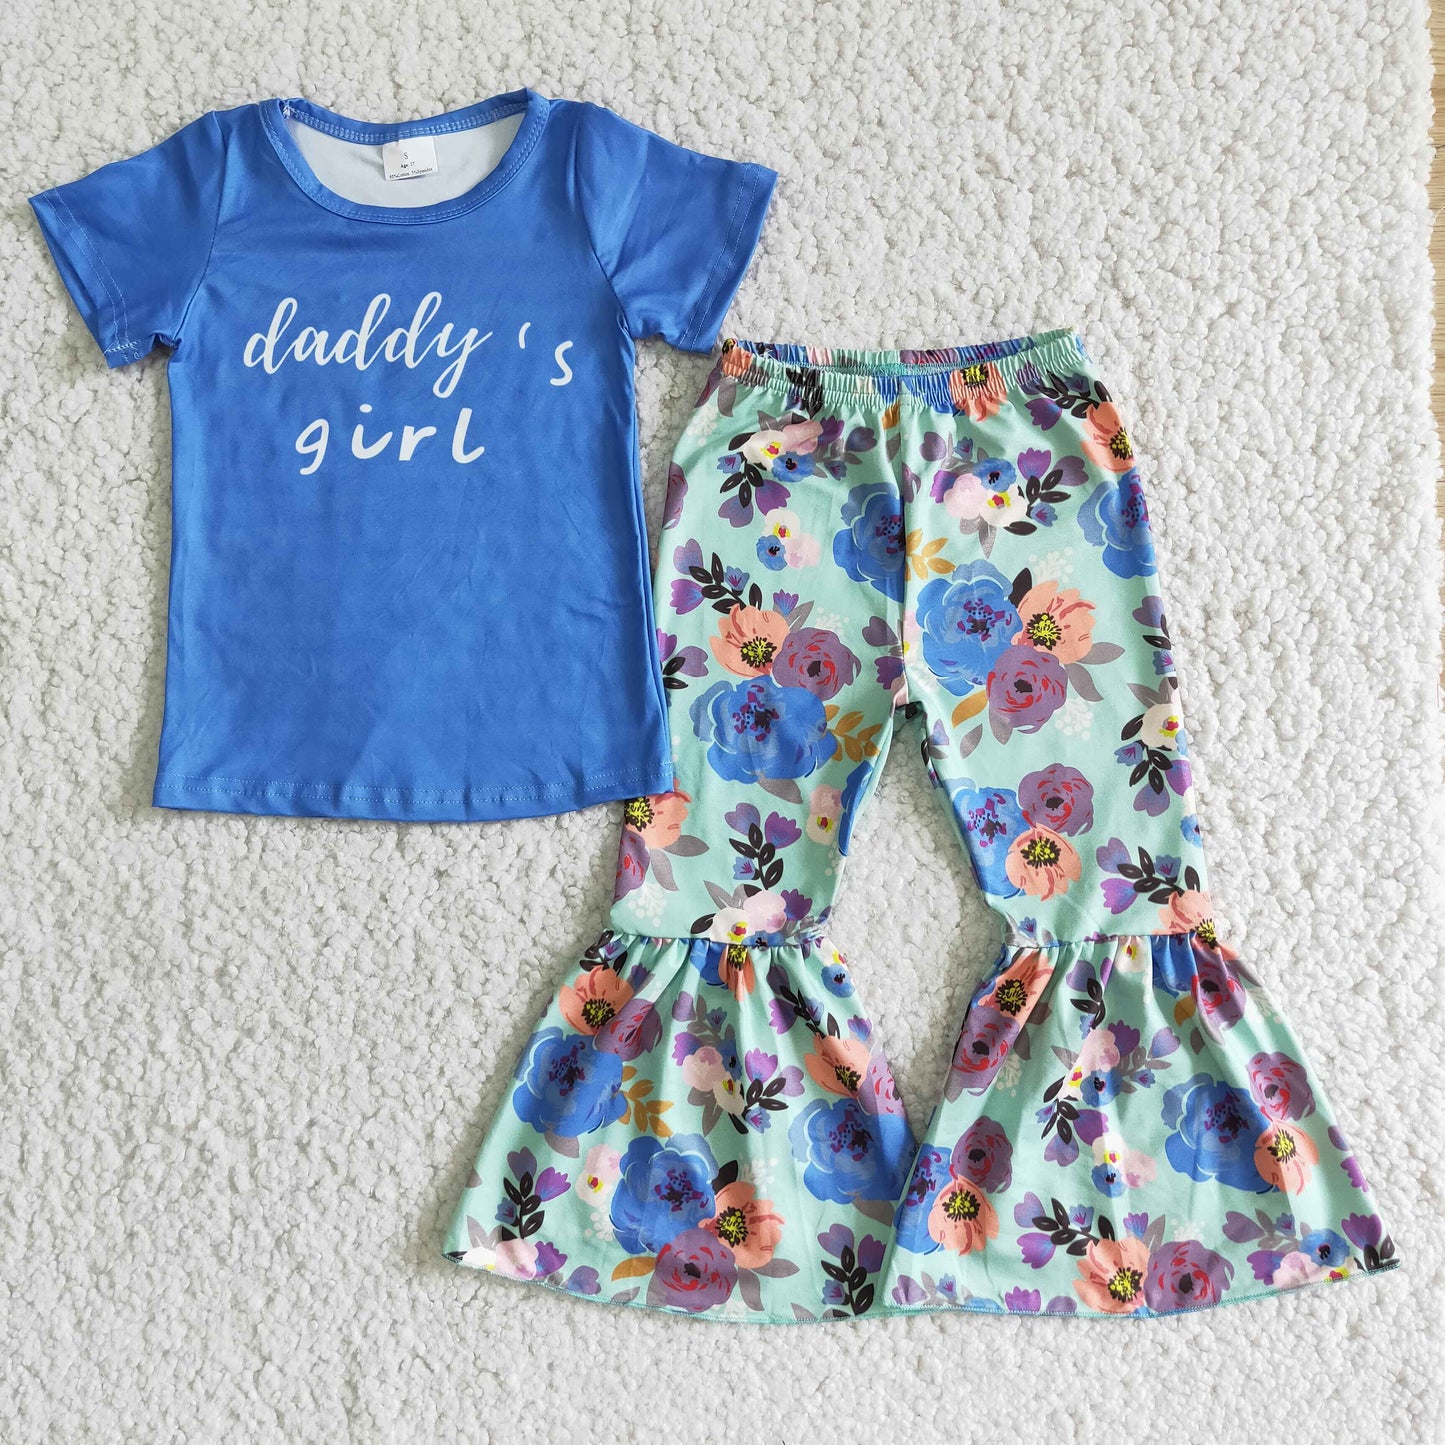 Daddy's girl shirt floral pants kids boutique clothing